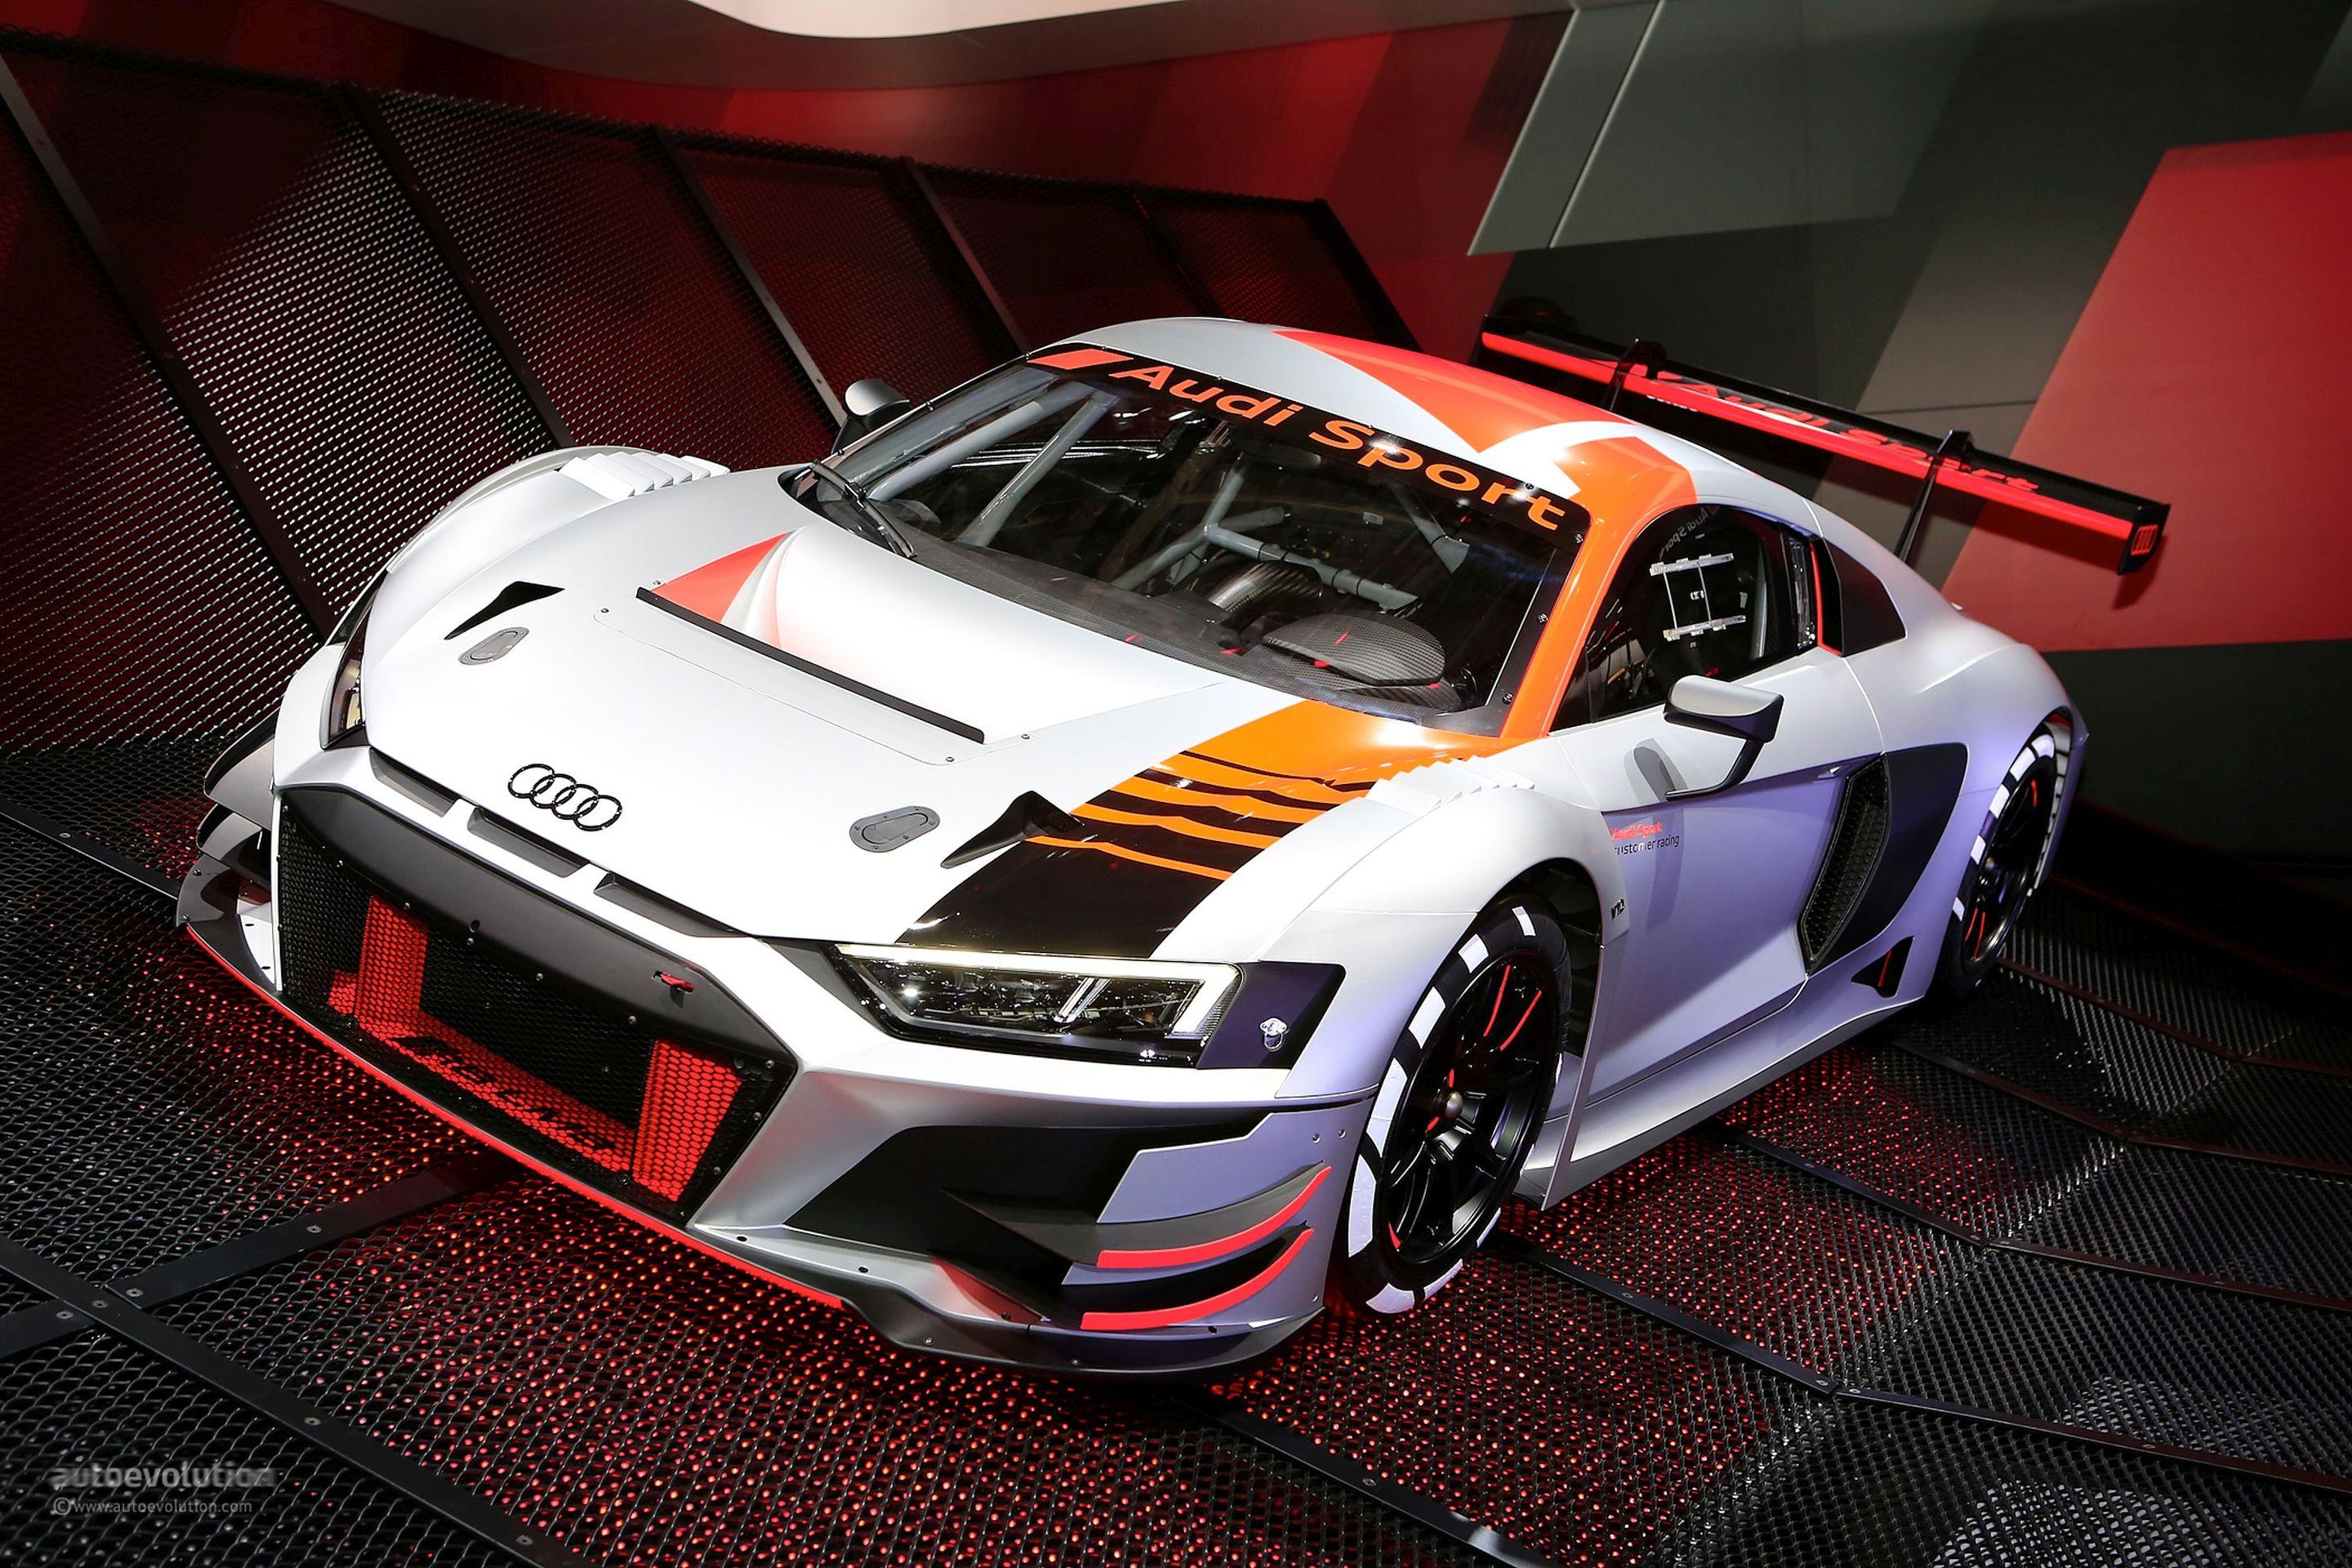 Audi R8 LMS Logo - 2019 Audi R8 LMS GT3 Racecar Costs $458,000, But You Can Have It for ...